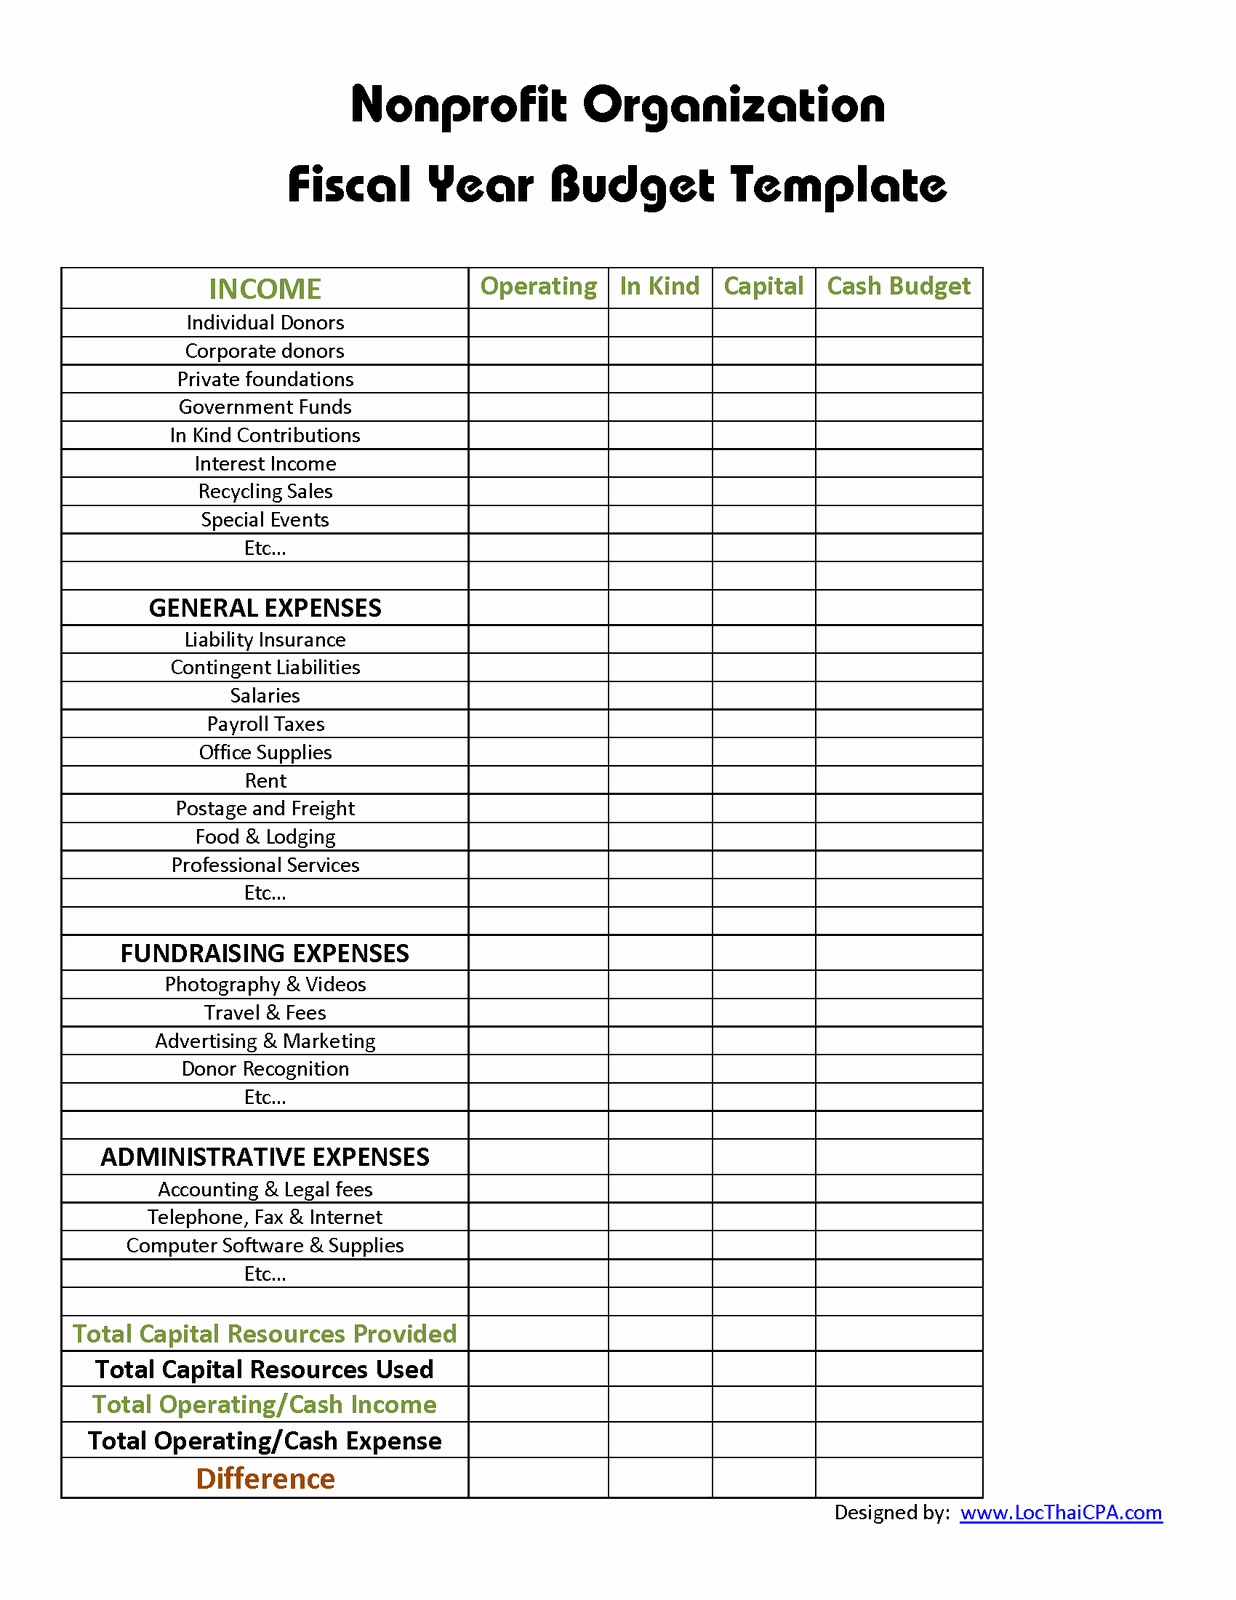 Non Profit Budget Template Lovely Non Profit Bud Template at Home